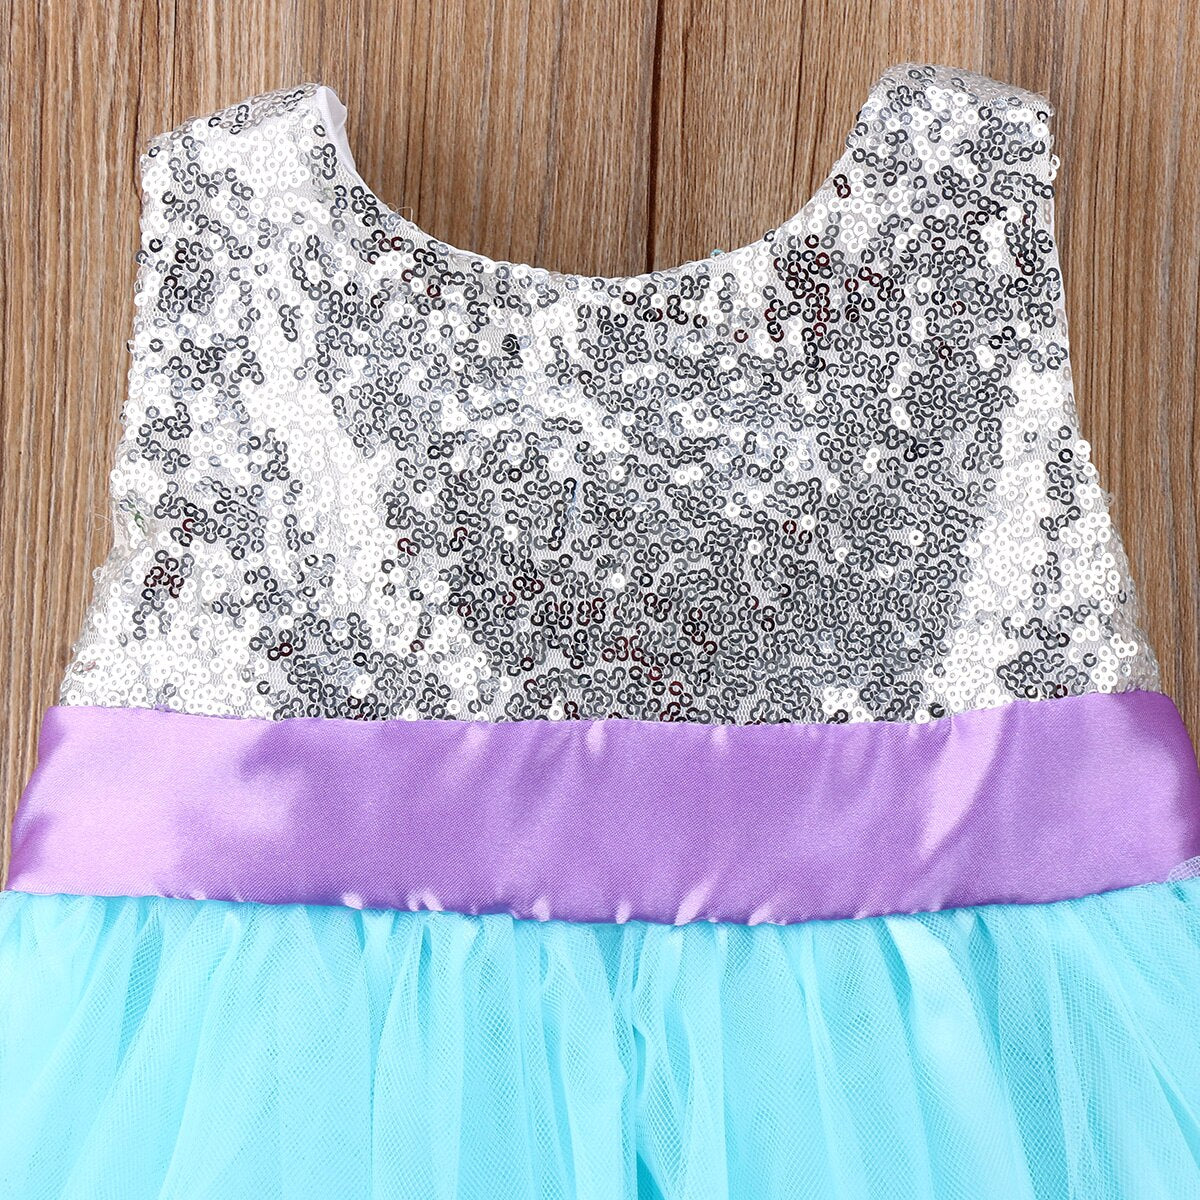 Sequin Tulle Dress 12M-5yrs Baby Toddler Girl Dress - Coco Potato - dresses and partywear for little girls